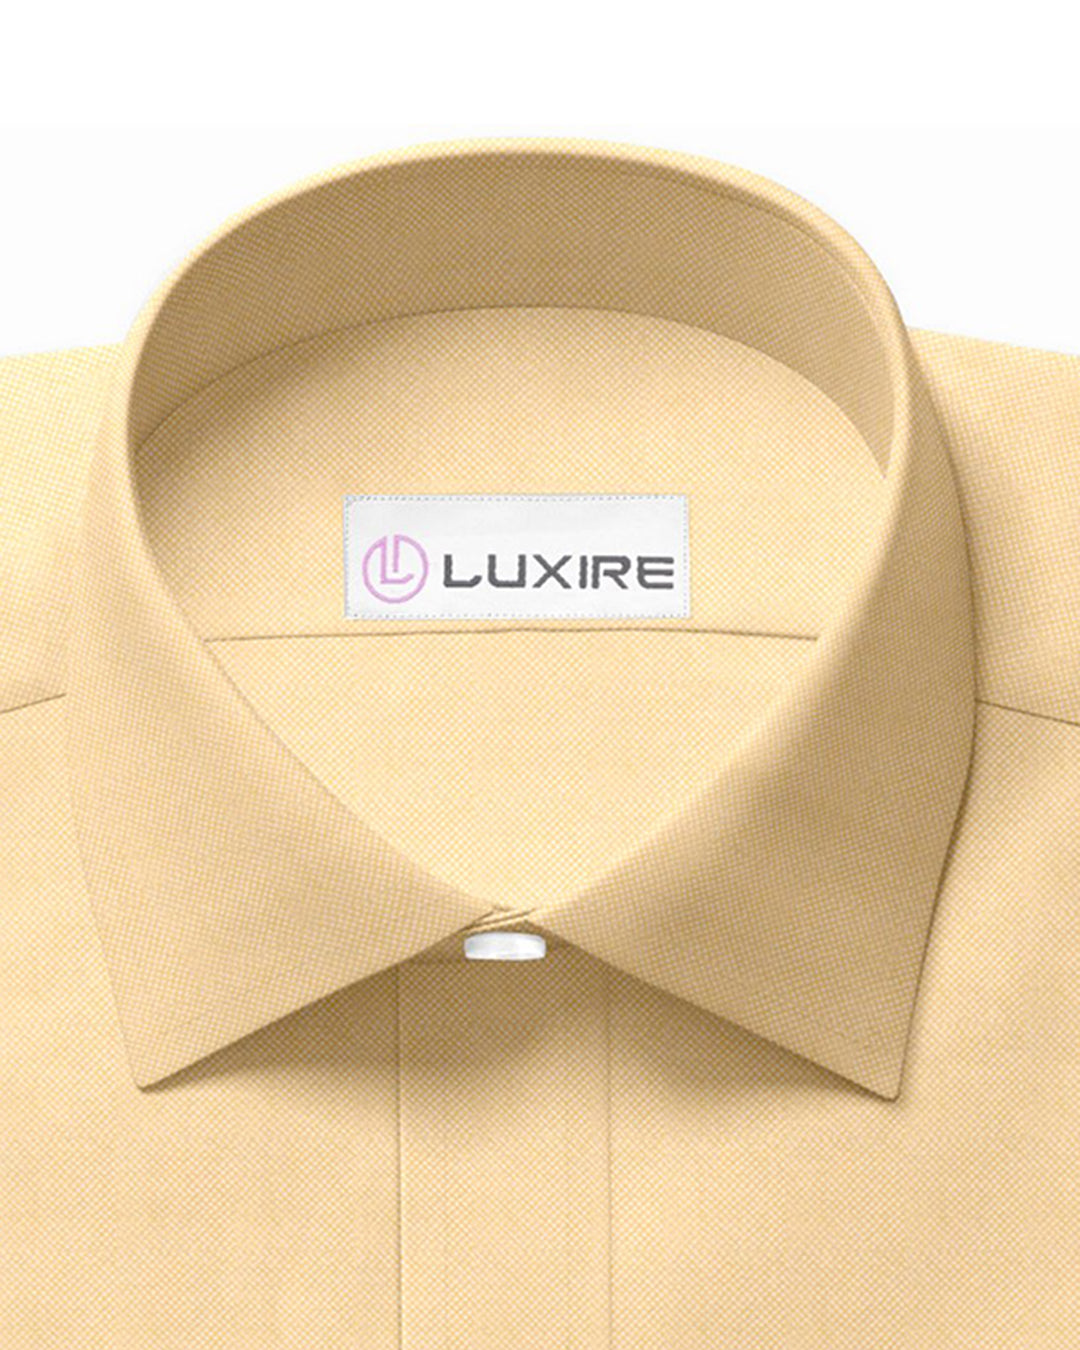 Luxire Wrinkle Free Travel Oxford: Egg Nog Yellow Shirt